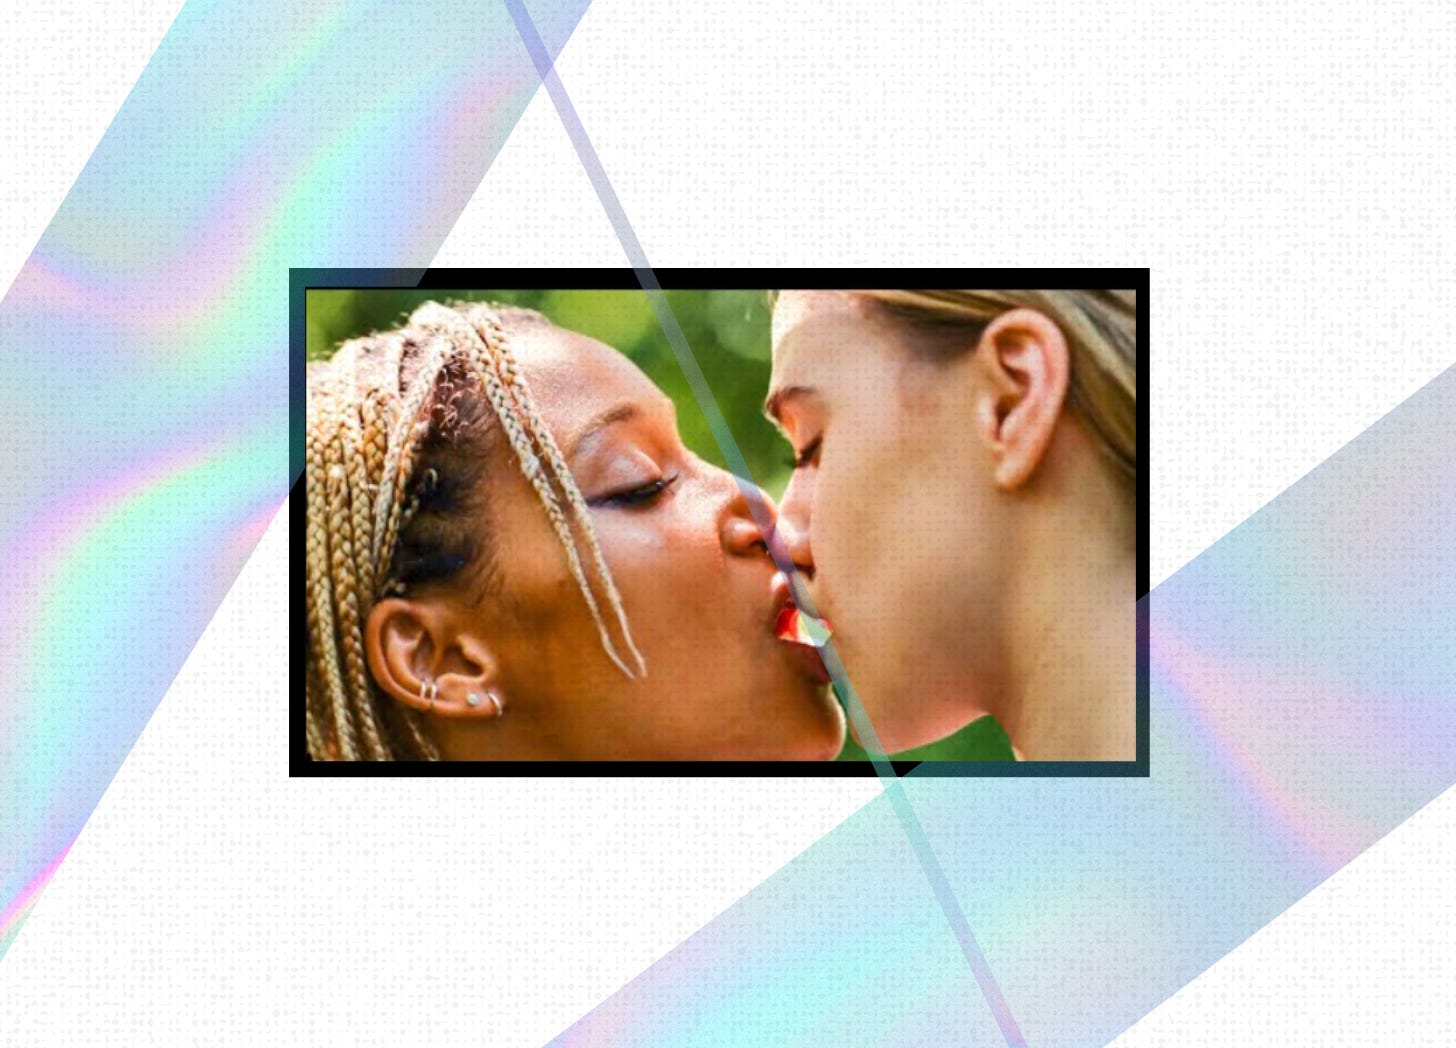 A screenshot of Amandla Steinberg and Maria Bakalova kissing. Their lips are touching and their mouths are open, as if breathing into one another’s mouths. The image is cropped in the center of the frame. Thin strips of groovy purple and blue bars cut across the rest of the frame. One slices between the two people.